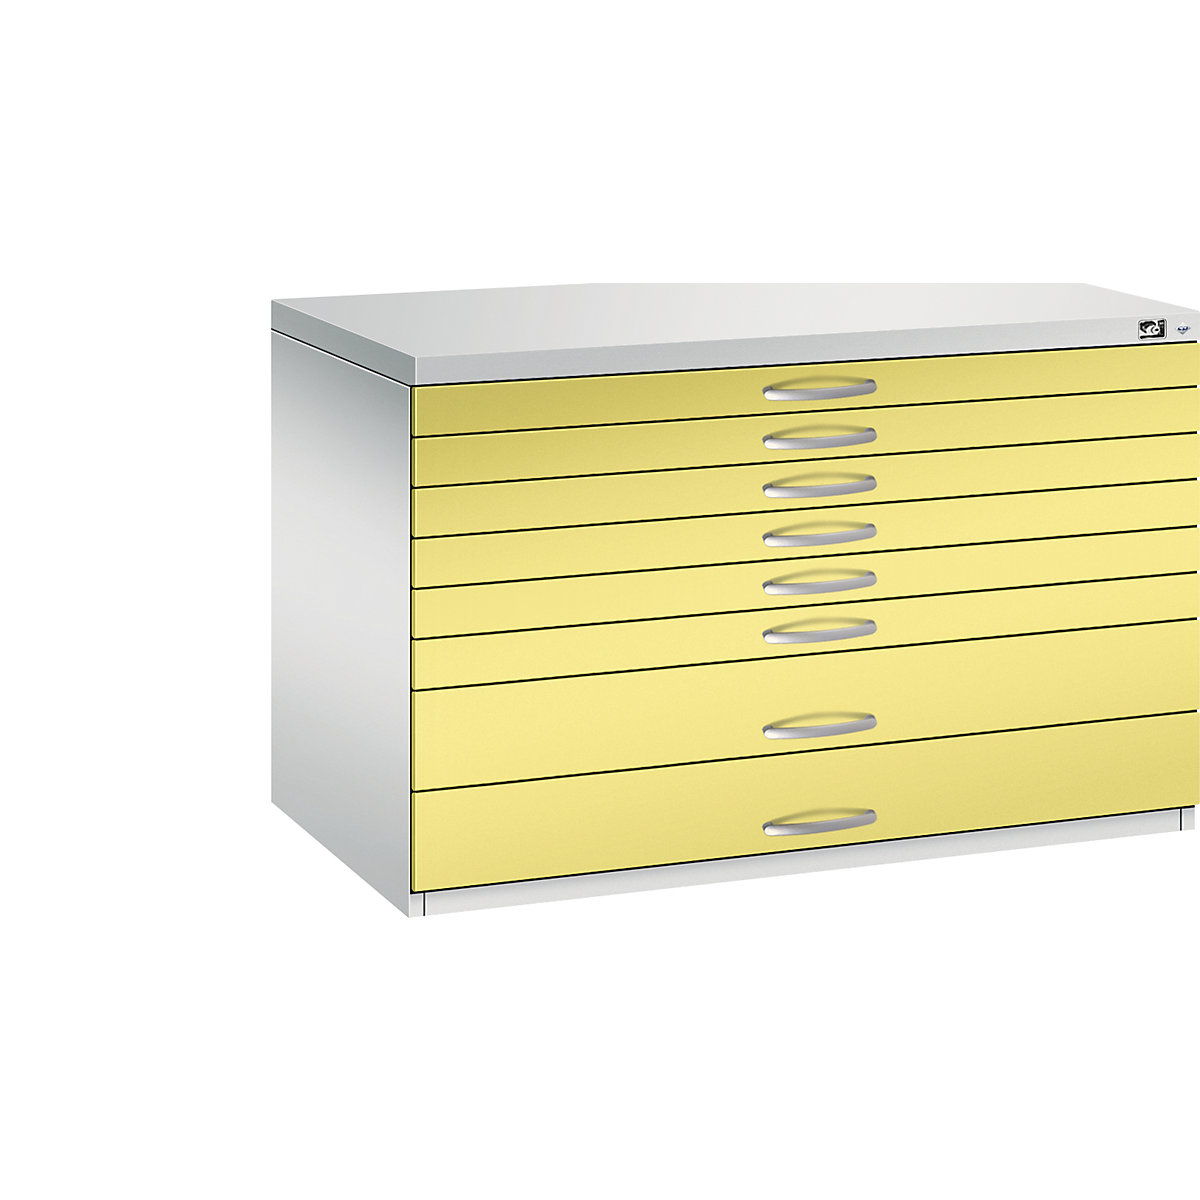 Drawing cabinet – C+P, A1, 8 drawers, height 760 mm, light grey / sulphur yellow-15